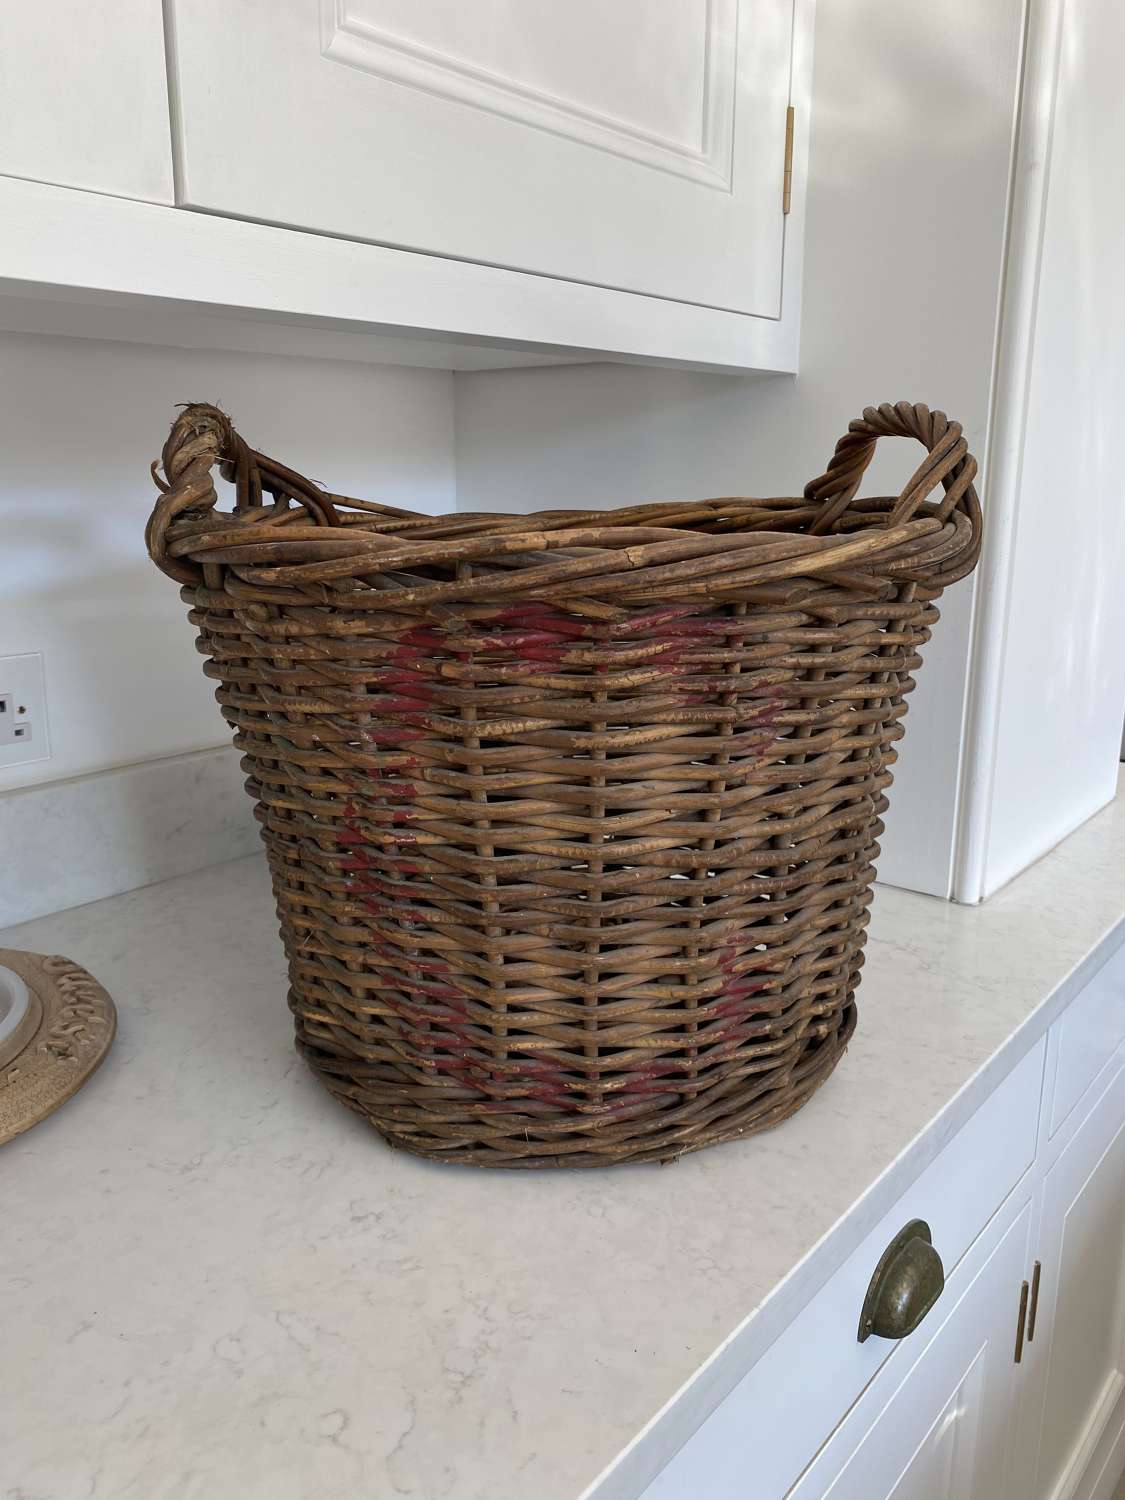 Early 20th Century Basket with Slatted Wooden Base - Initial C